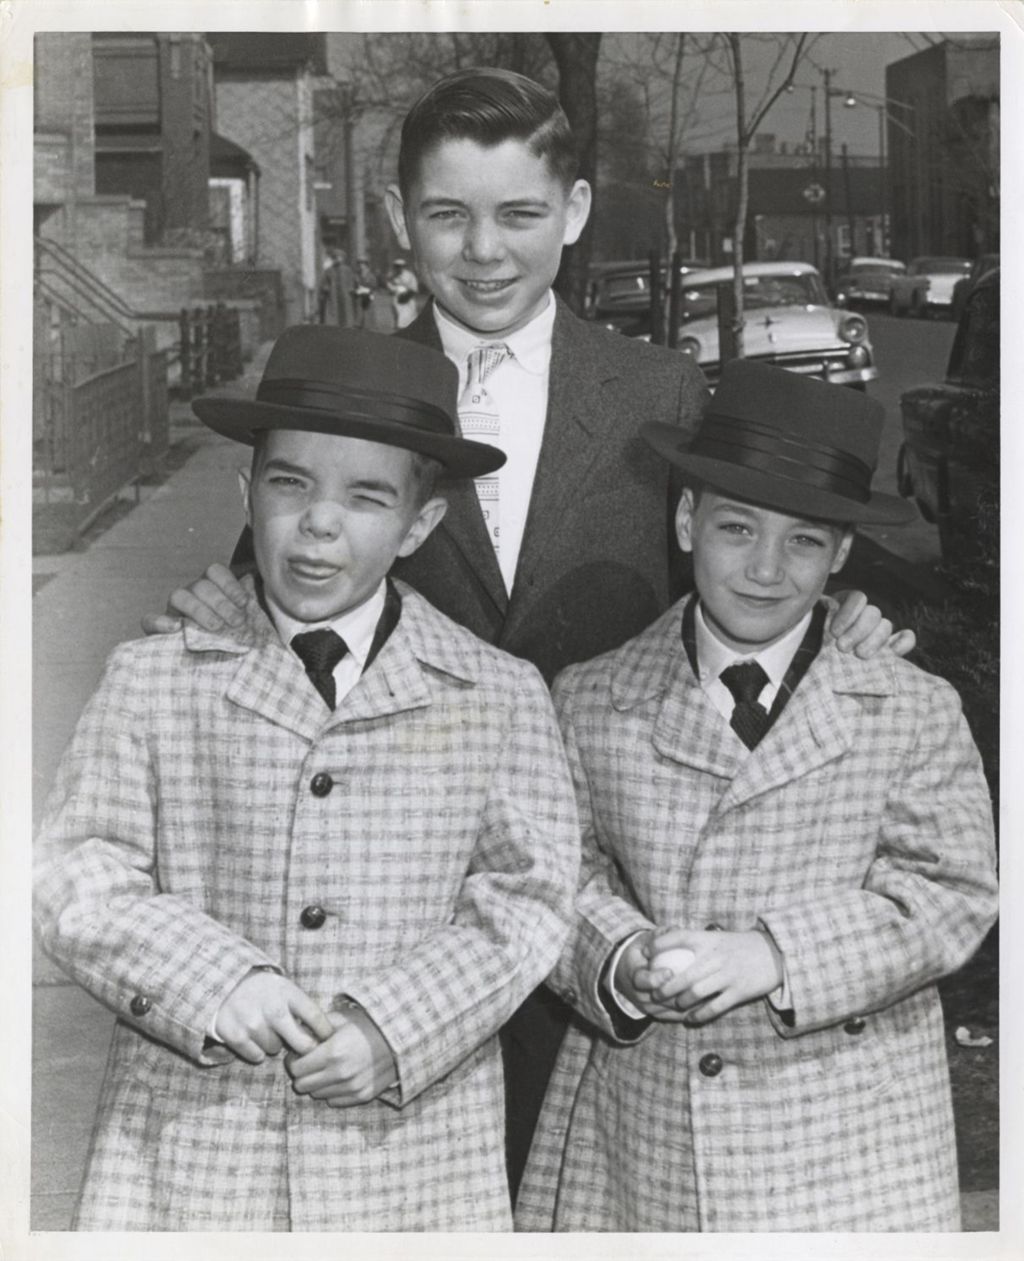 Michael, John, and William Daley outside